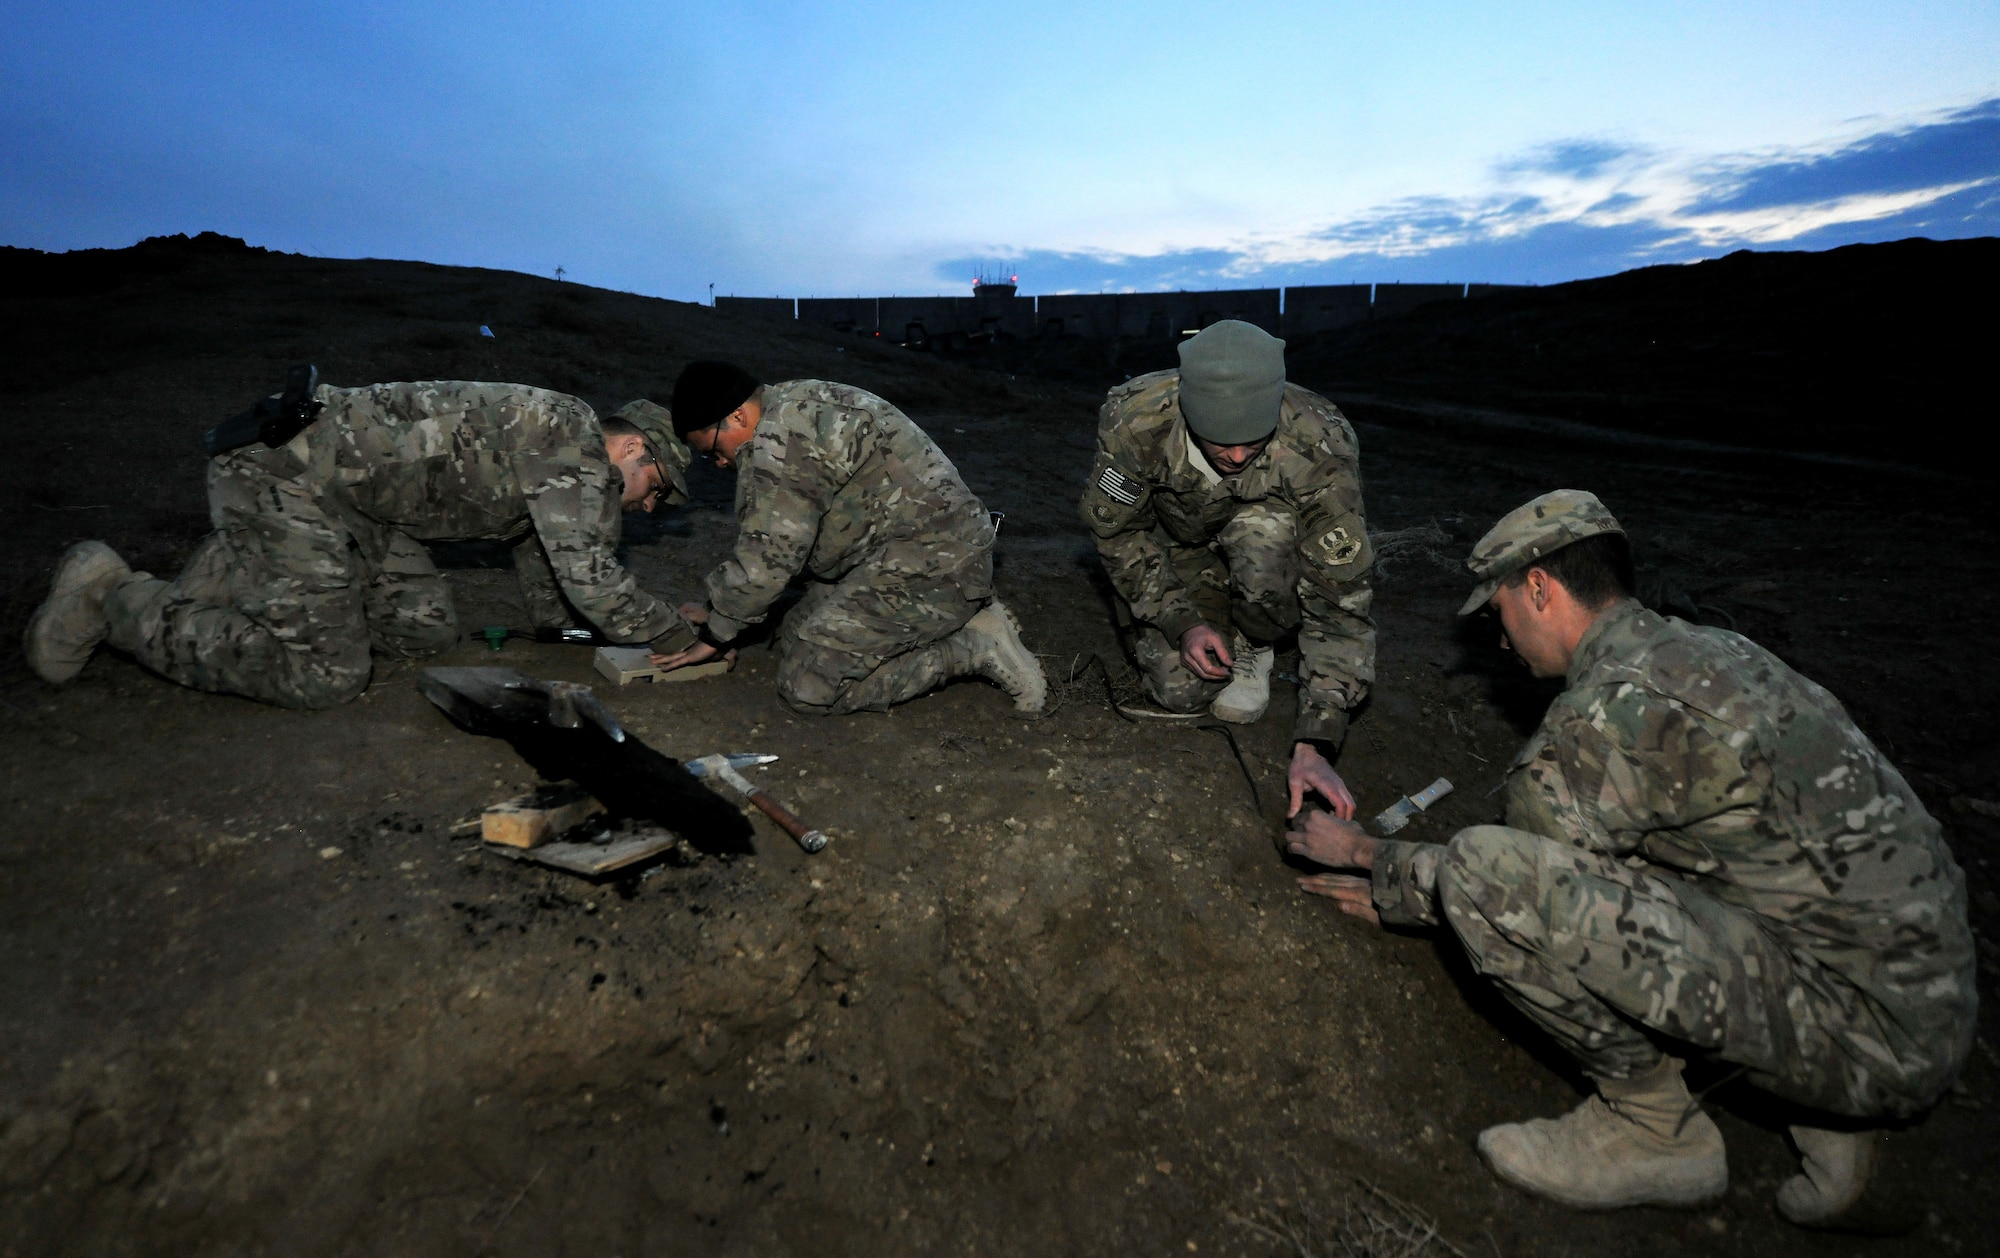 Tech. Sgt. John Dolbee, Staff Sgt. Ben De Santiago, 1st Lt. Joshua Loomis, and Staff Sgt. Craig Ritter, 755th Expeditionary Security Forces Squadron Reaper team trackers, emplace ground sensors for an enemy movement and detection training scenario at Bagram Airfield, Afghanistan, Feb. 14, 2013. The tracker team members are all deployed from the 822nd Base Defense Squadron, Moody Air Force Base, Ga. (U.S. Air Force photo/Senior Airman Chris Willis)